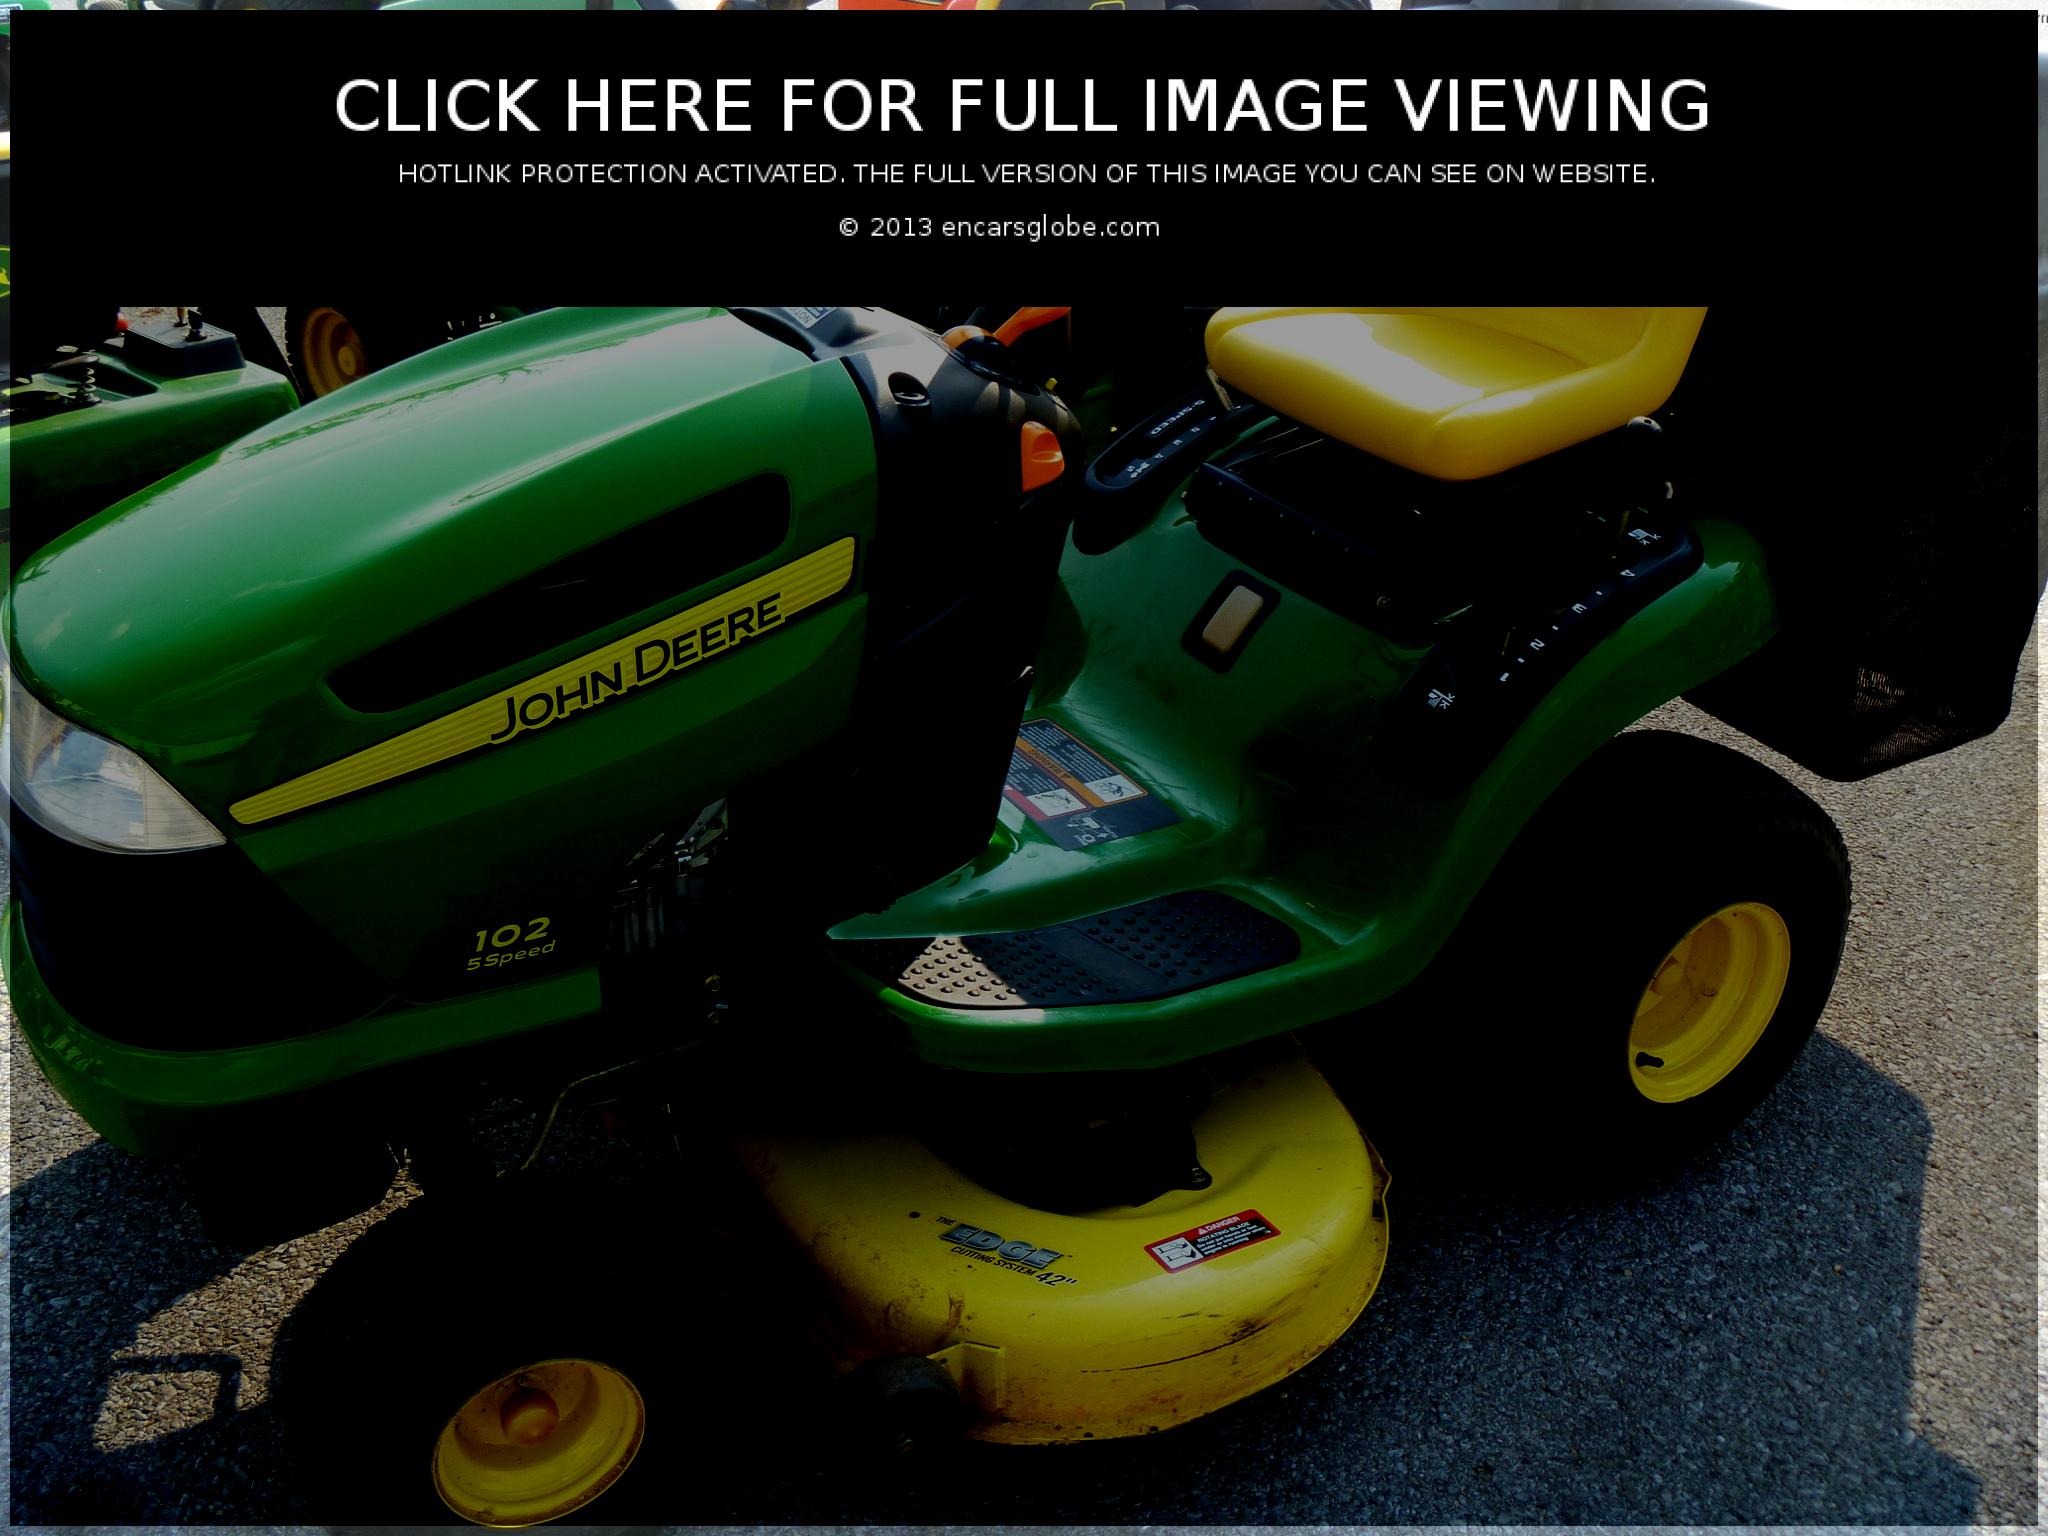 John Deere 102: Photo gallery, complete information about model ...